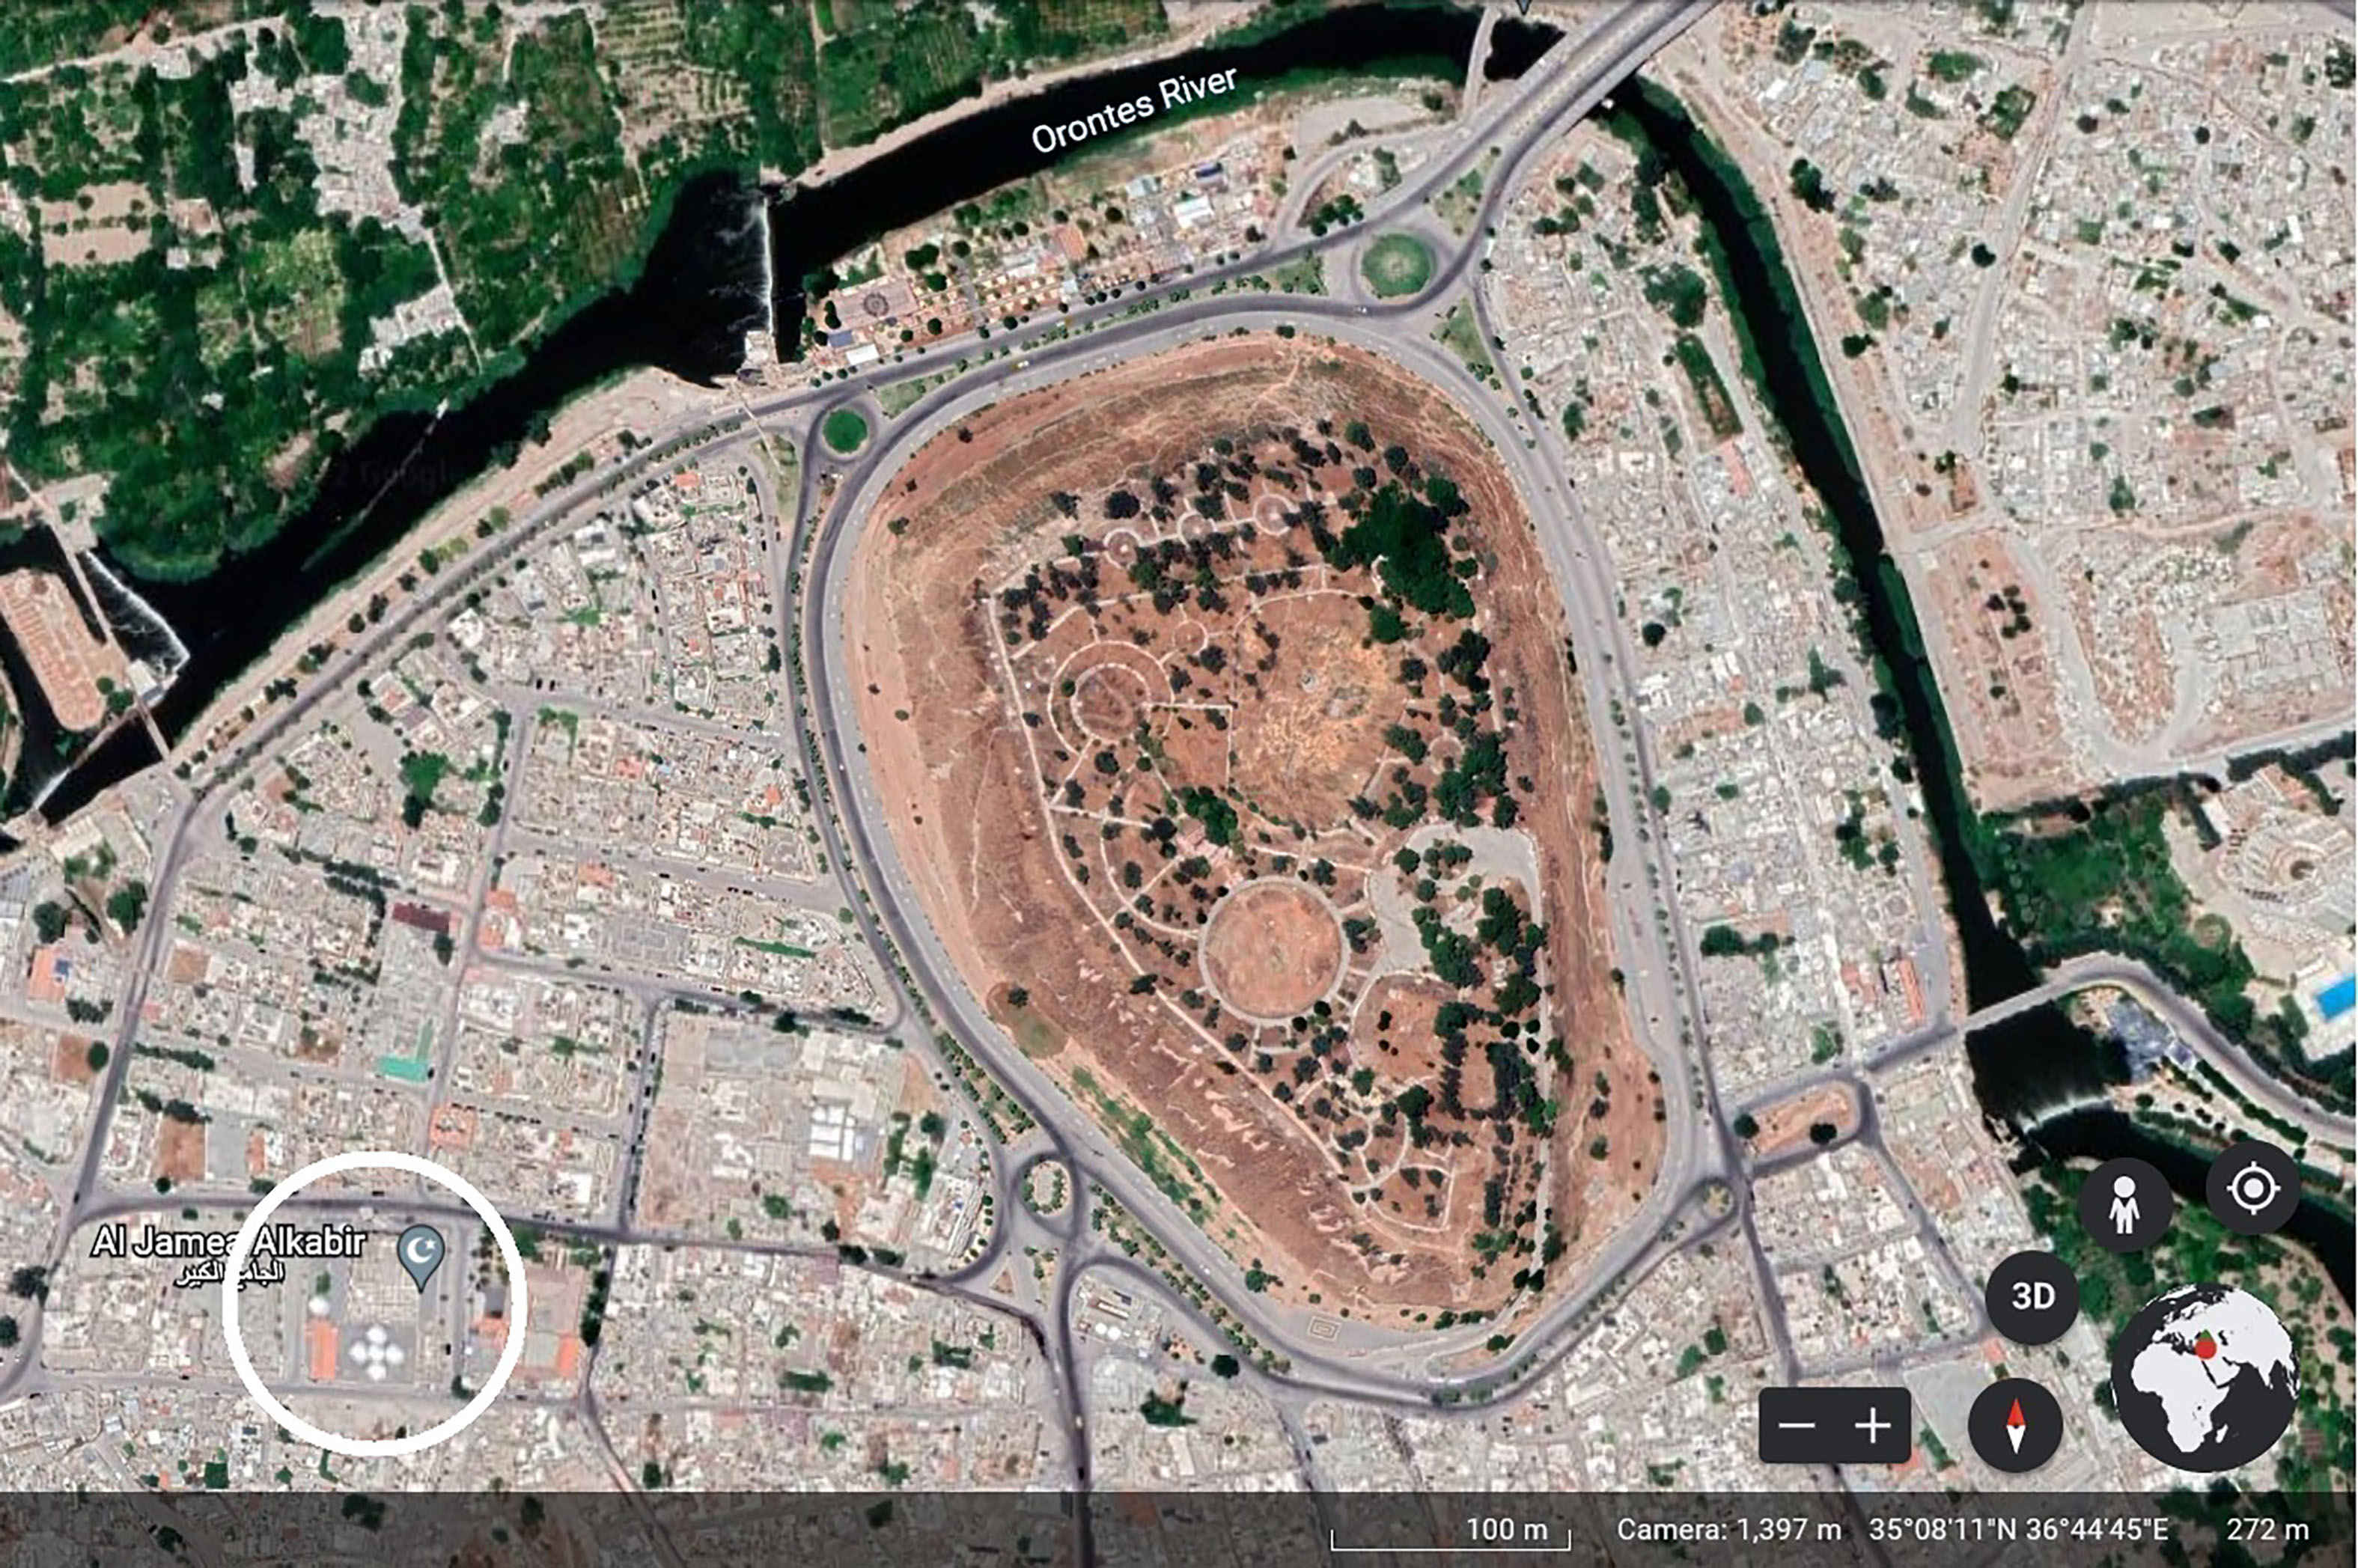 Arial photo of the city of Hama, showing the location of the Upper Mosque. Source: Google Earth, Syria, Hama. Available at: https://earth.google.com/web/@35.13664589,36.74596577,272.26646855a,1124.94796253d,35y,0h,0t,0r (Accessed: 27 July 2022).